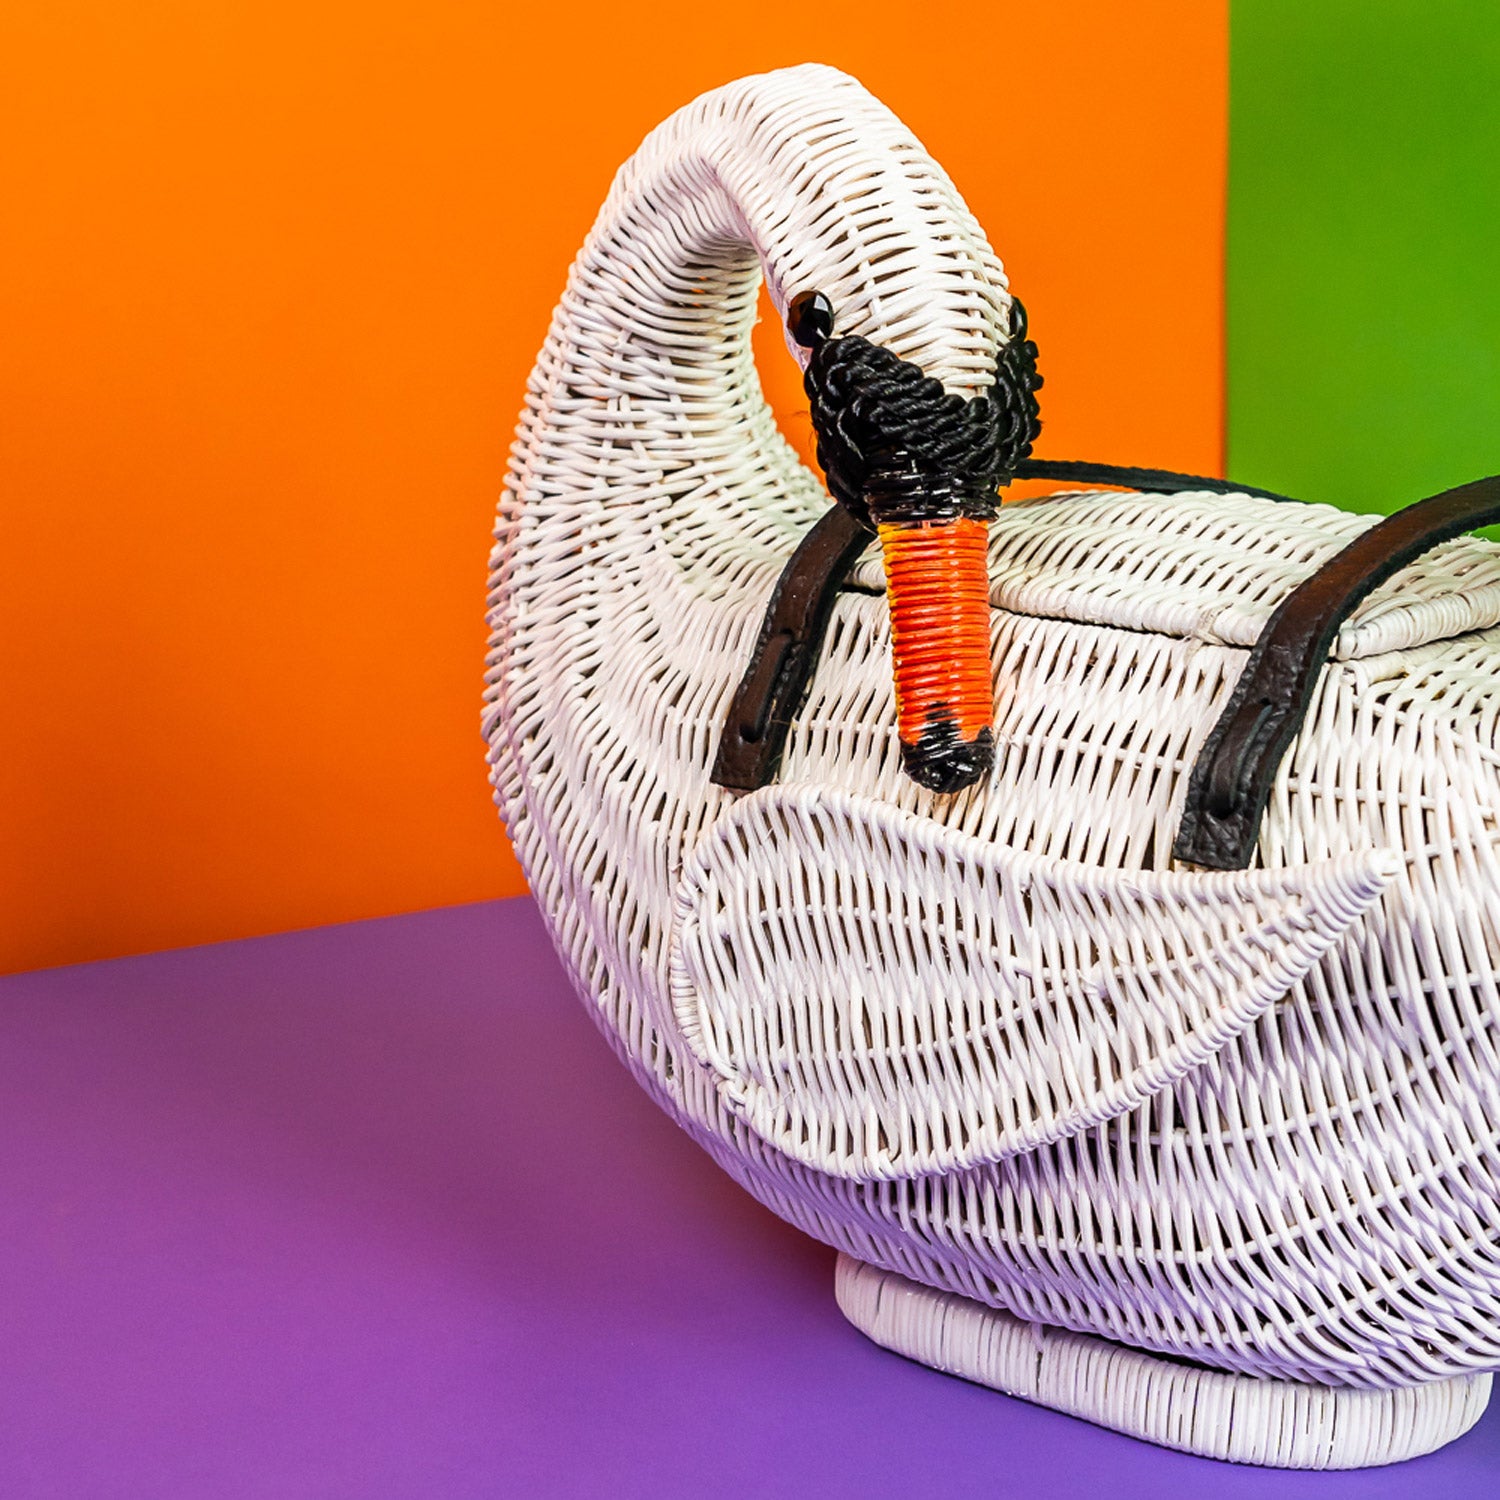 Quirky Wicker Bags for the Truly Ridiculous | Wicker Darling